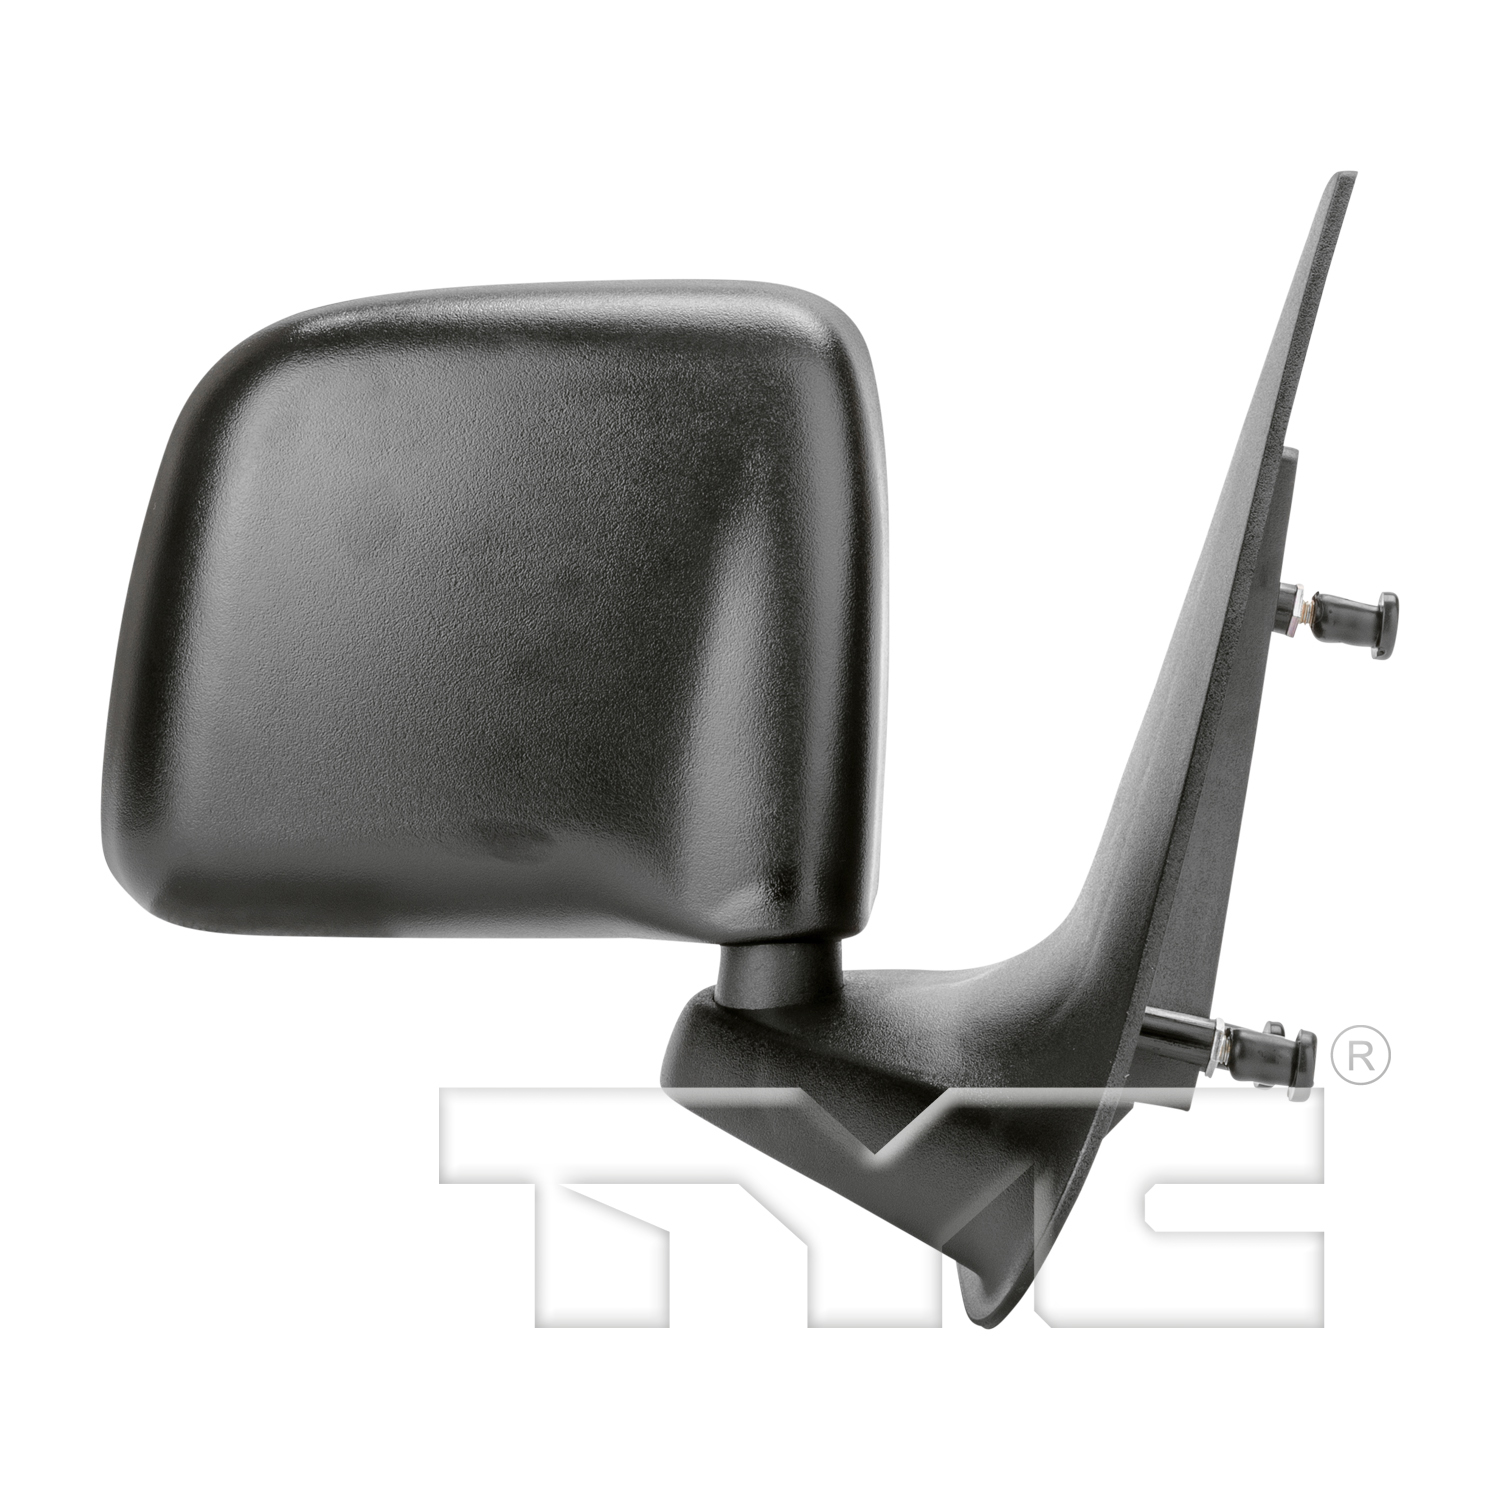 Aftermarket MIRRORS for FORD - RANGER, RANGER,93-05,RT Mirror outside rear view